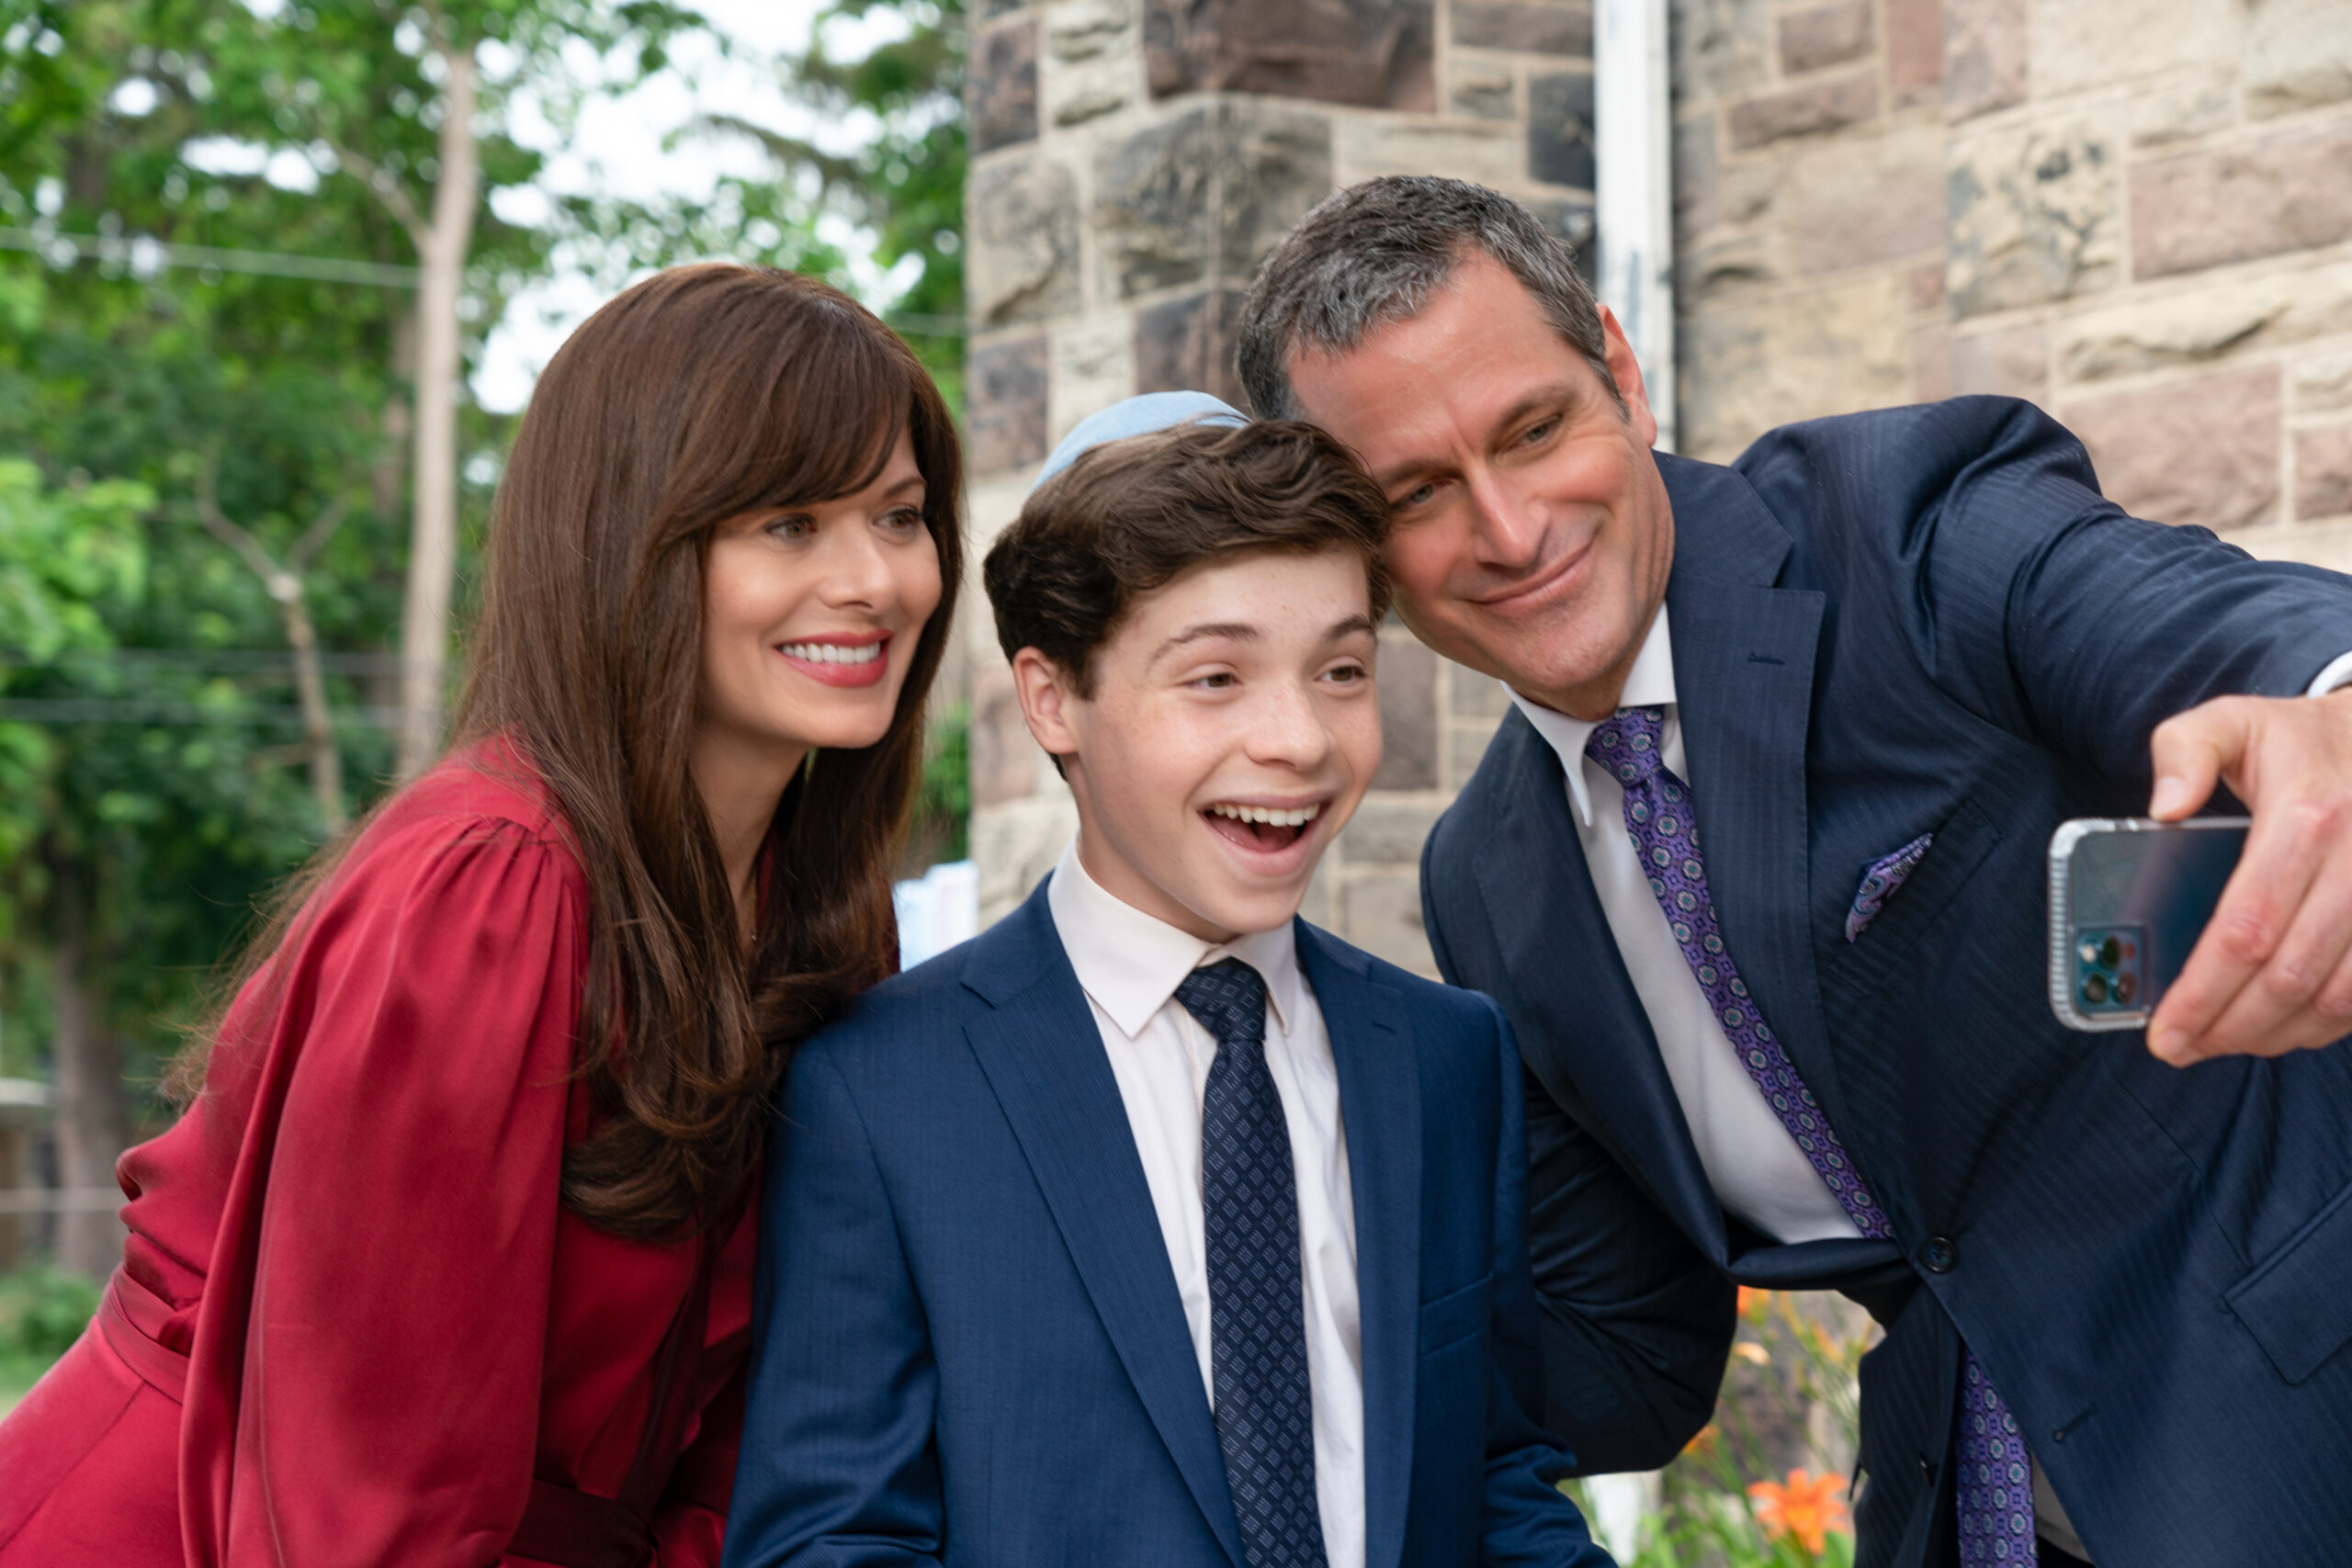 Debra Messing as Jessica, Eli Golden as Evan, Peter Hermann as Joel in <i>13 The Musical</i>. Photo courtesy of Alan Markfield for Netflix.